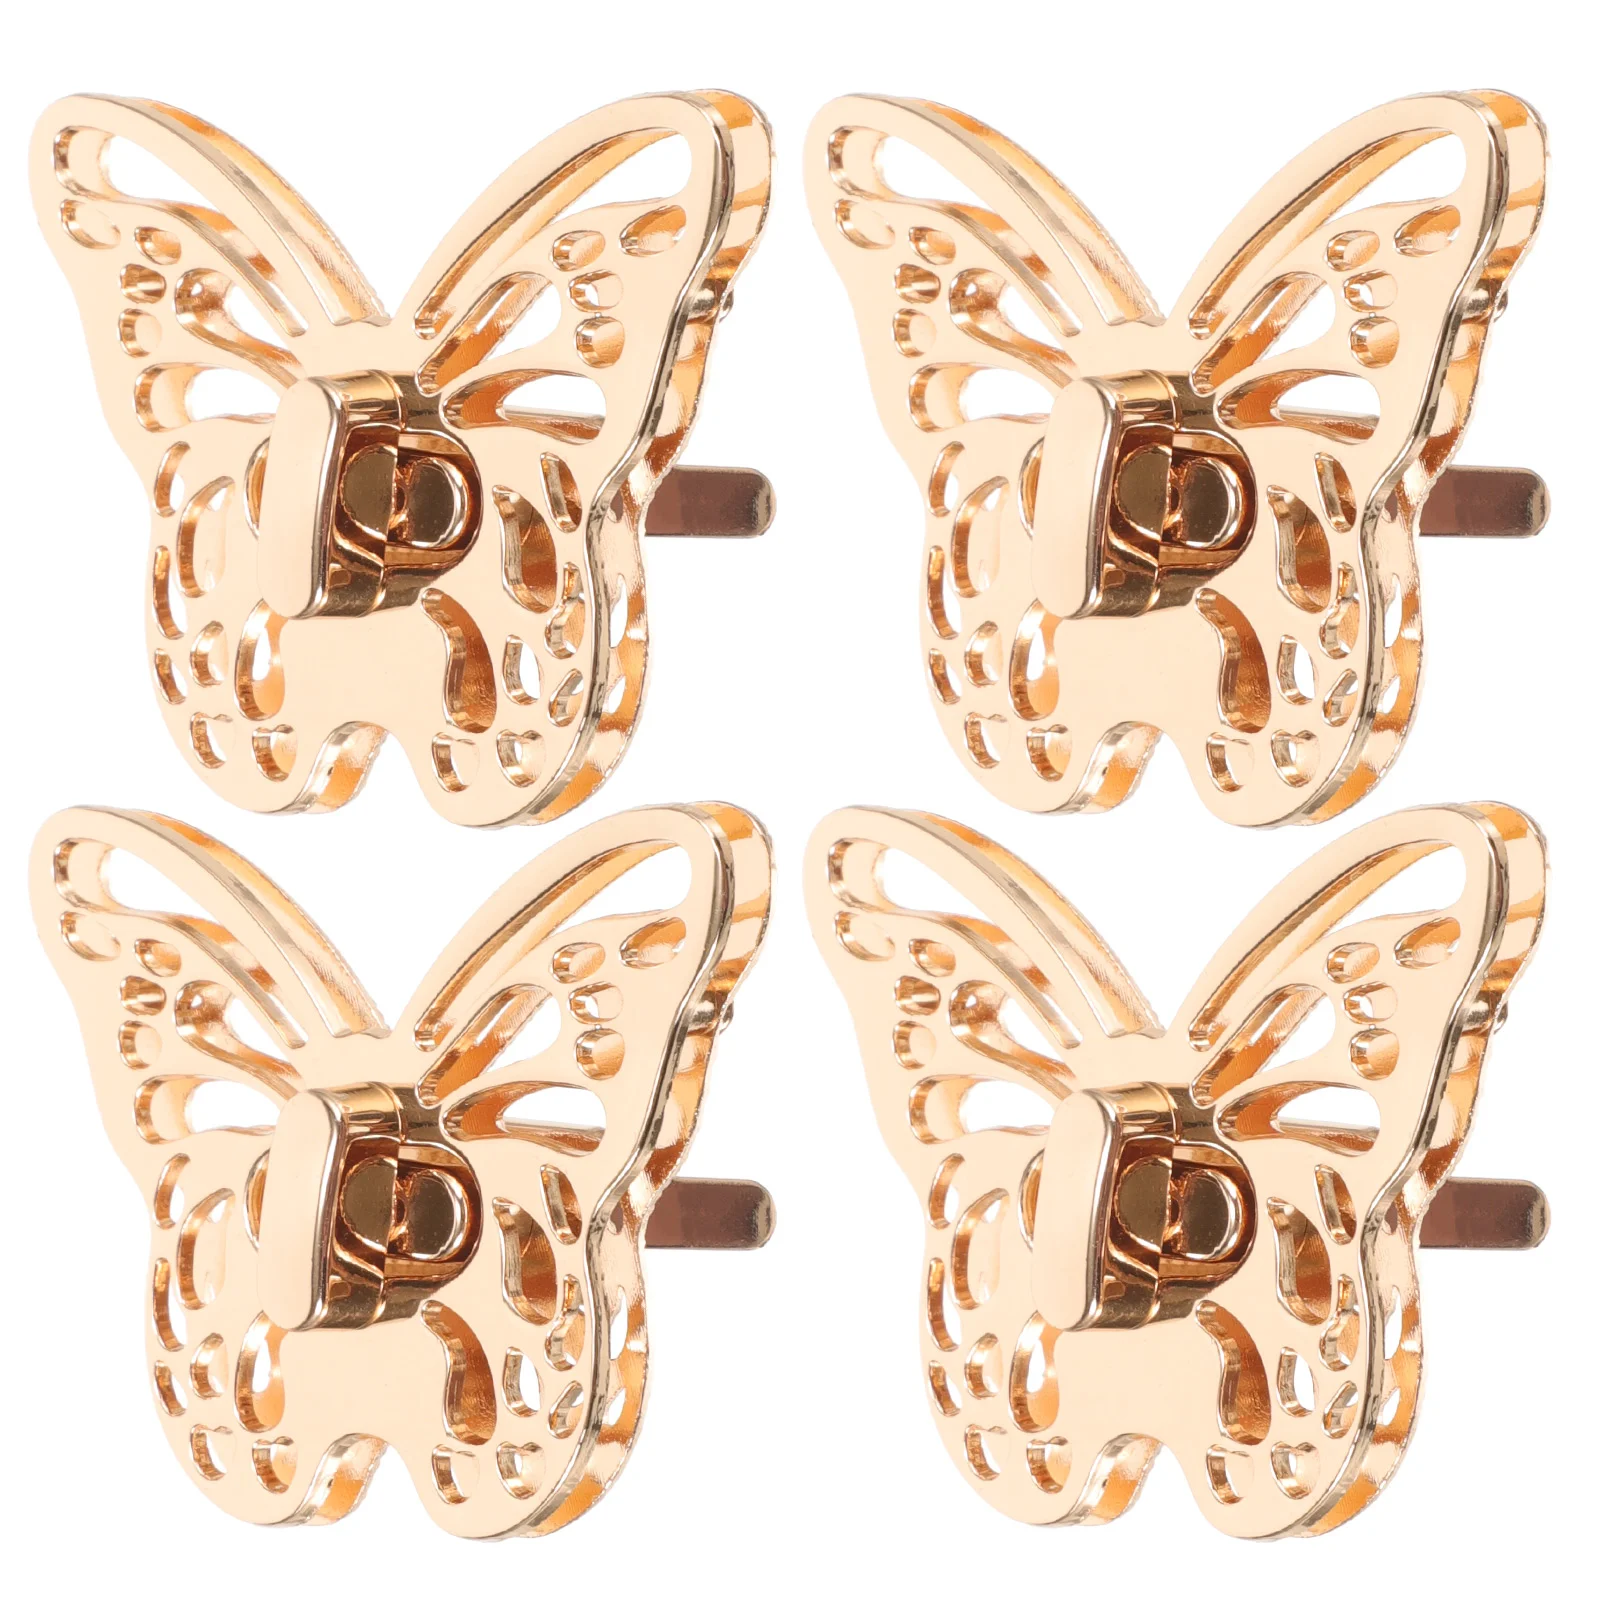 

4 Pcs Wallet Buckle Baggies Metal Small Butterfly Locks Bags Hardware Replacements Delicate Clasps Decorative Purse Shaped Turn